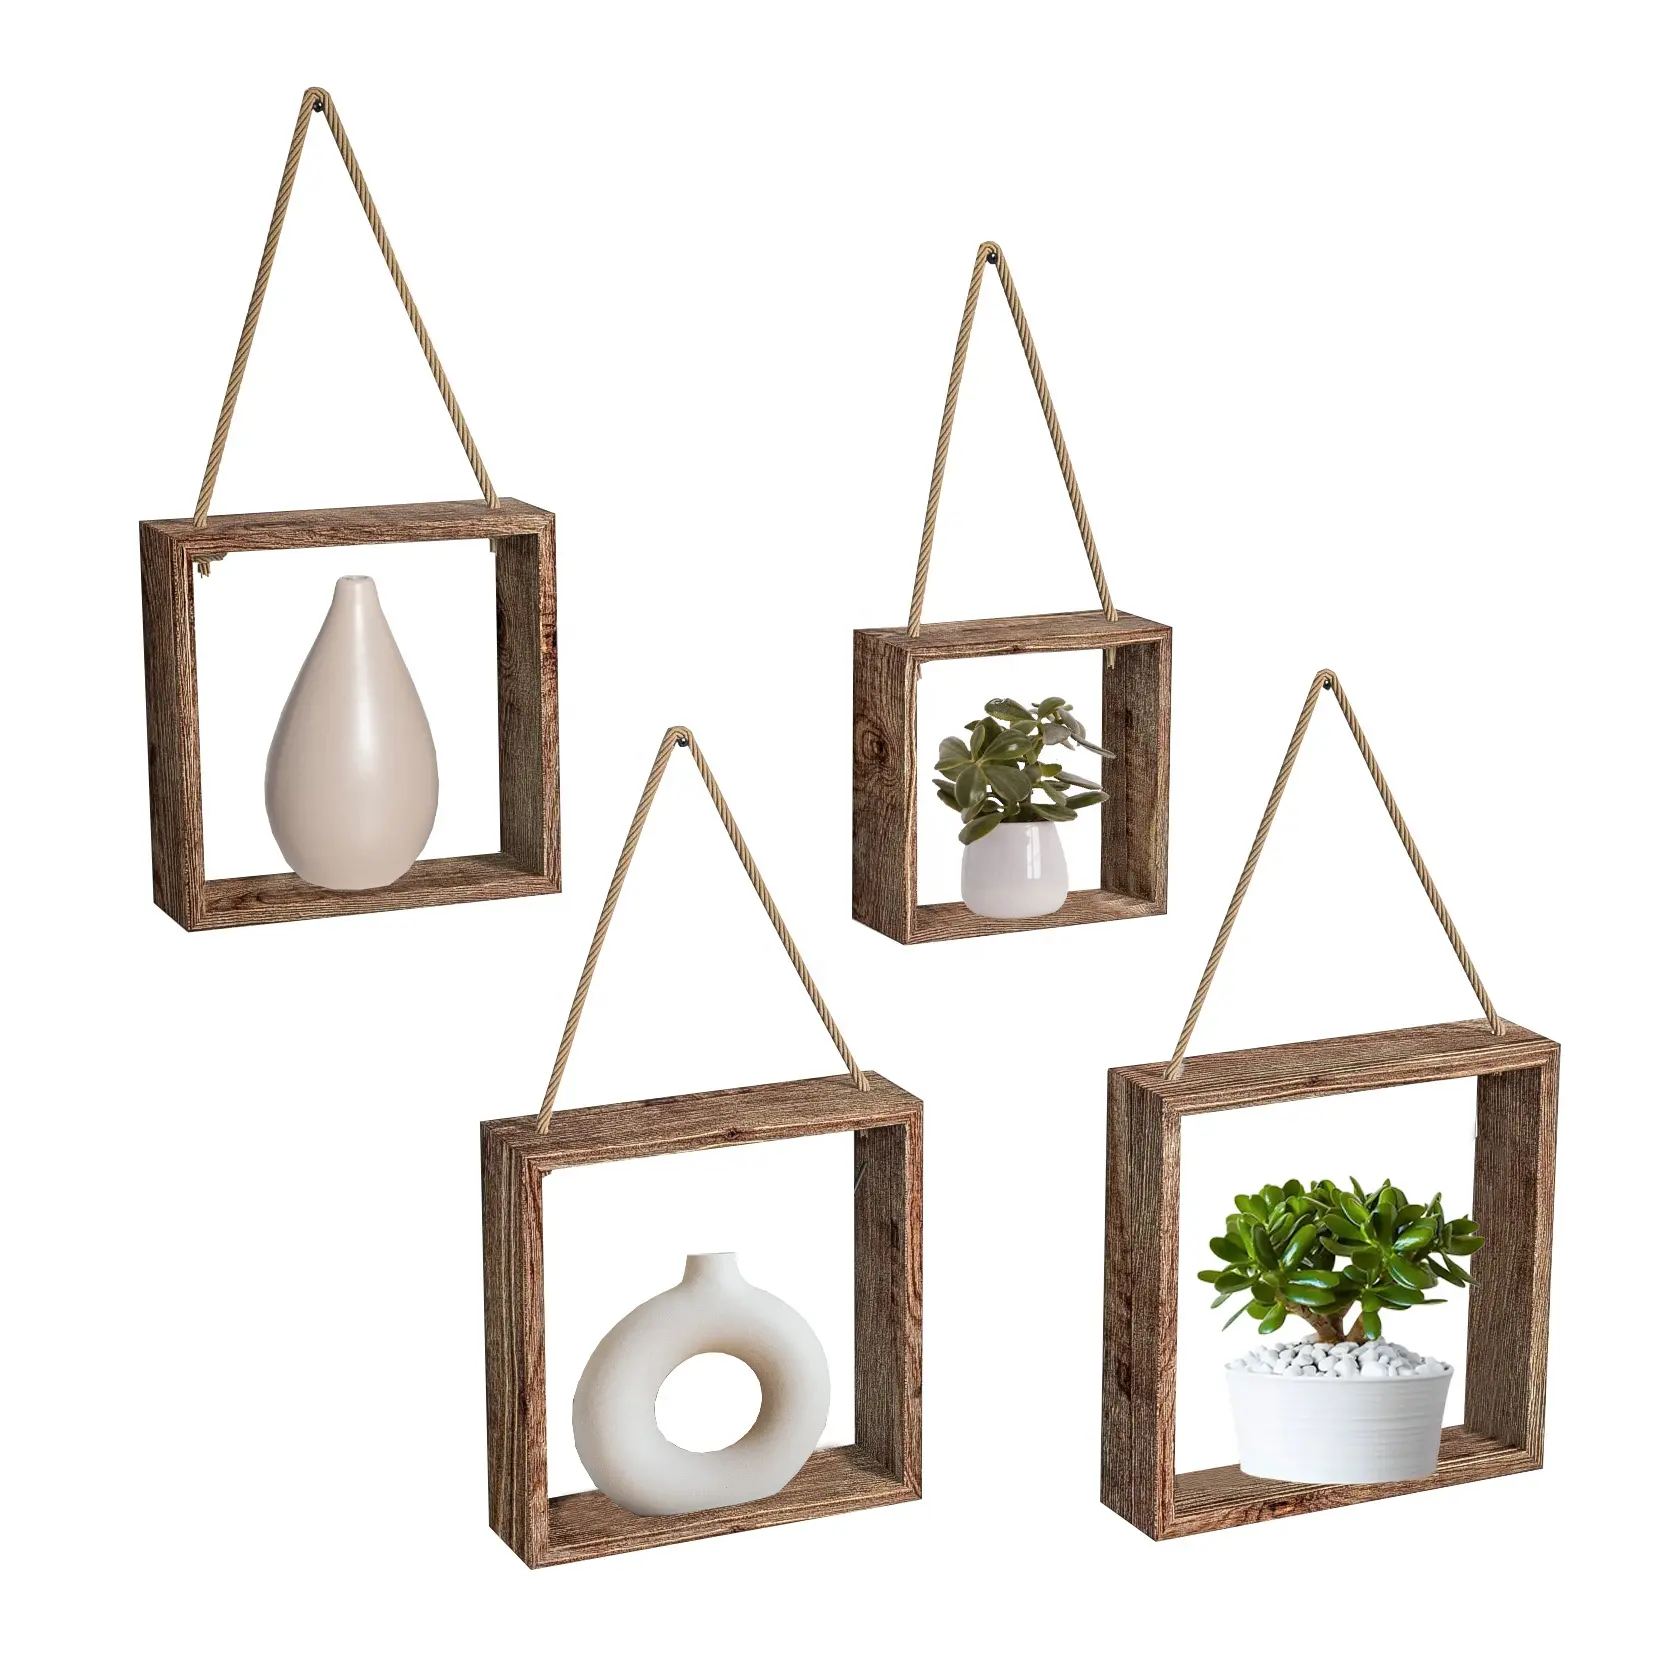 Set Of Wall Decor Rustic Wood Floating Hanging Square Shelves Wall Mounted Cube Display Storage Shadow For Living Room